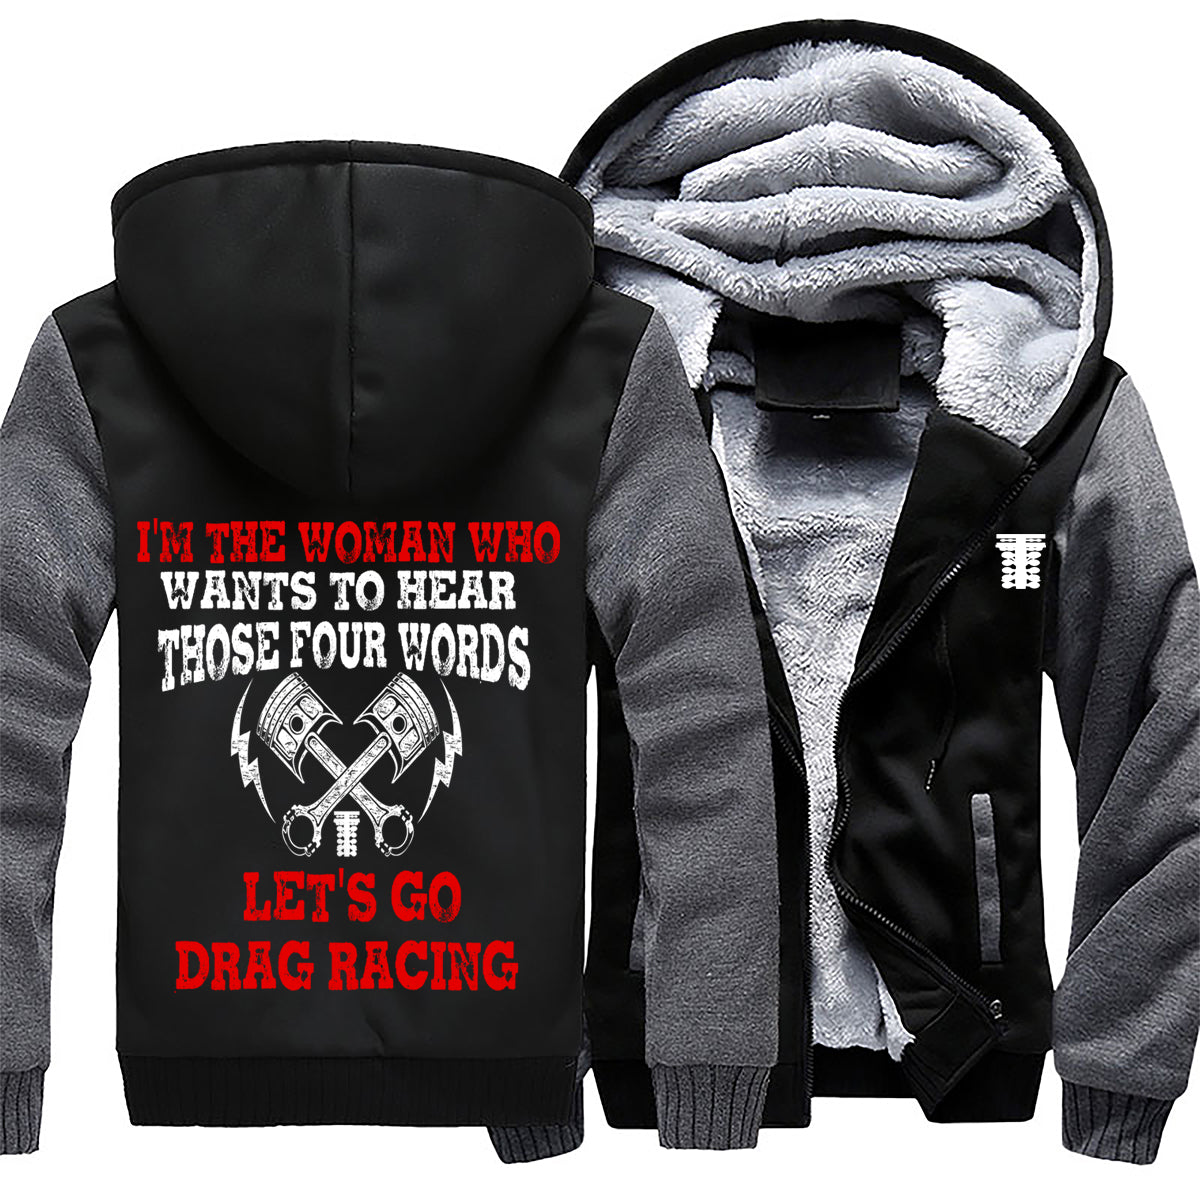 I'm The Woman Who Wants To hear Those 4 Words Let's Go Drag Racing Jacket 